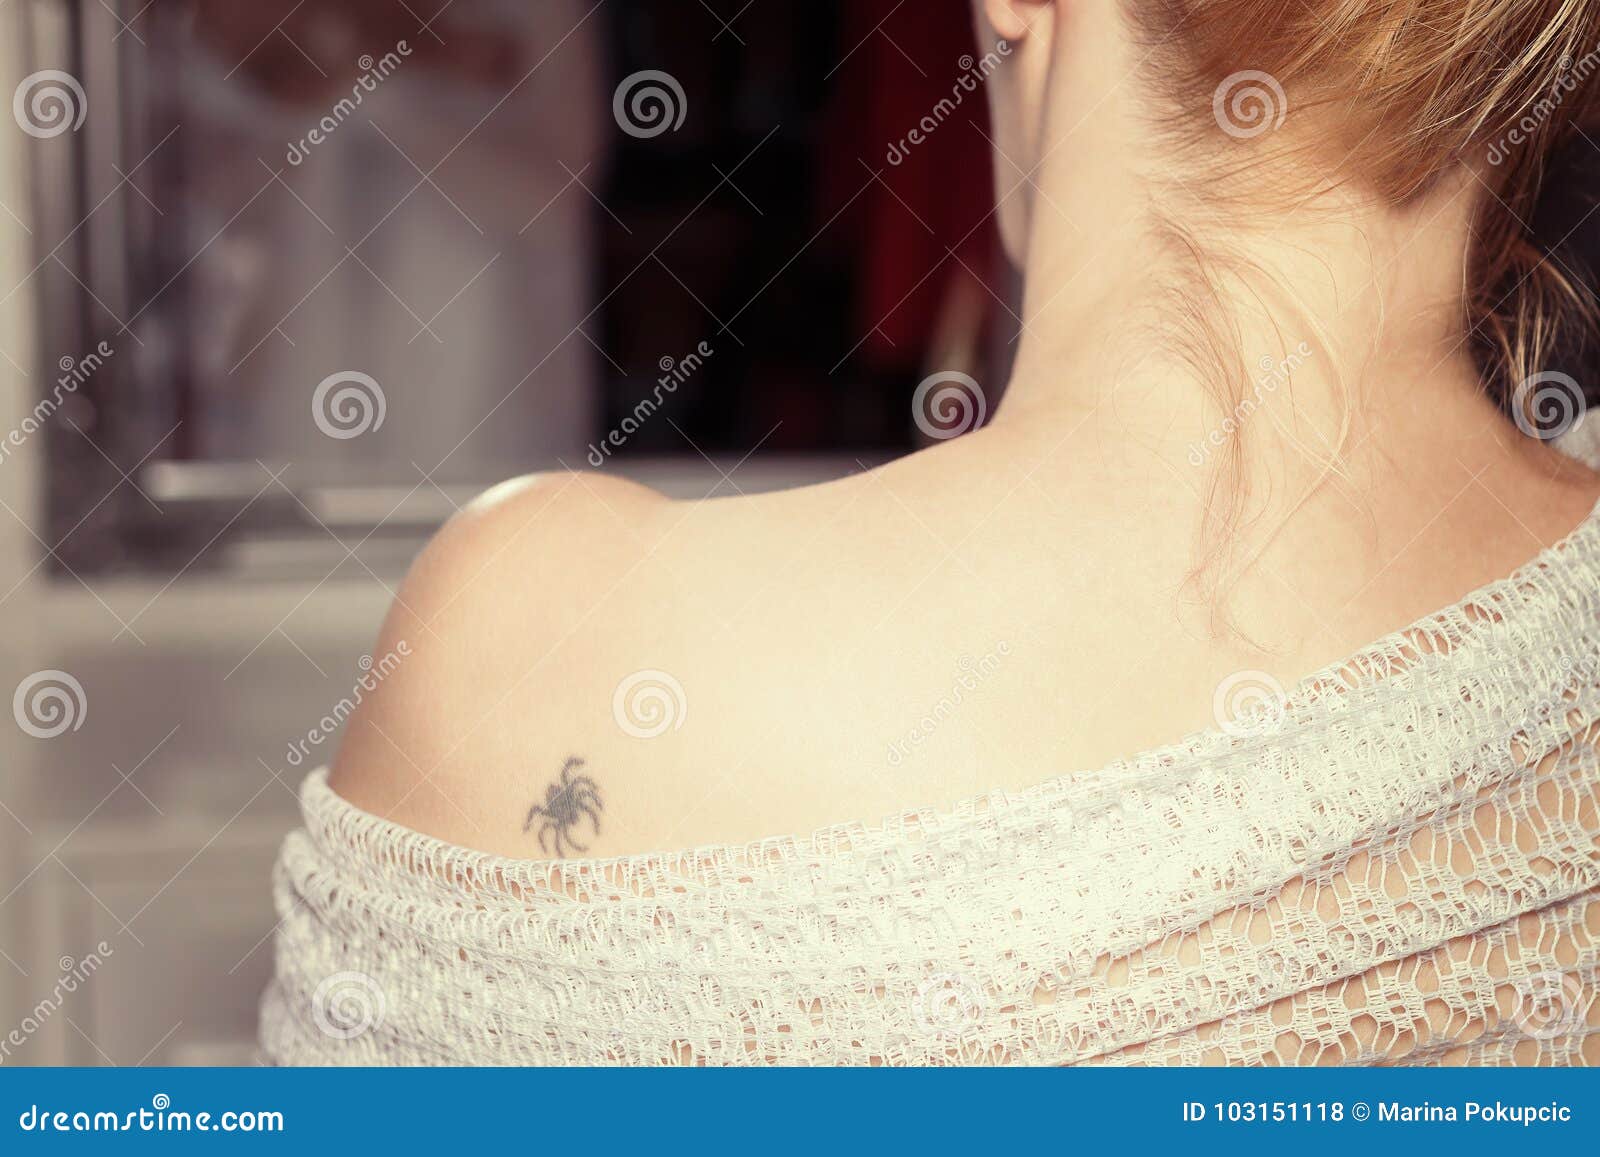 Back View of Womans Shoulder Stock Photo  Image of skin body 103151118